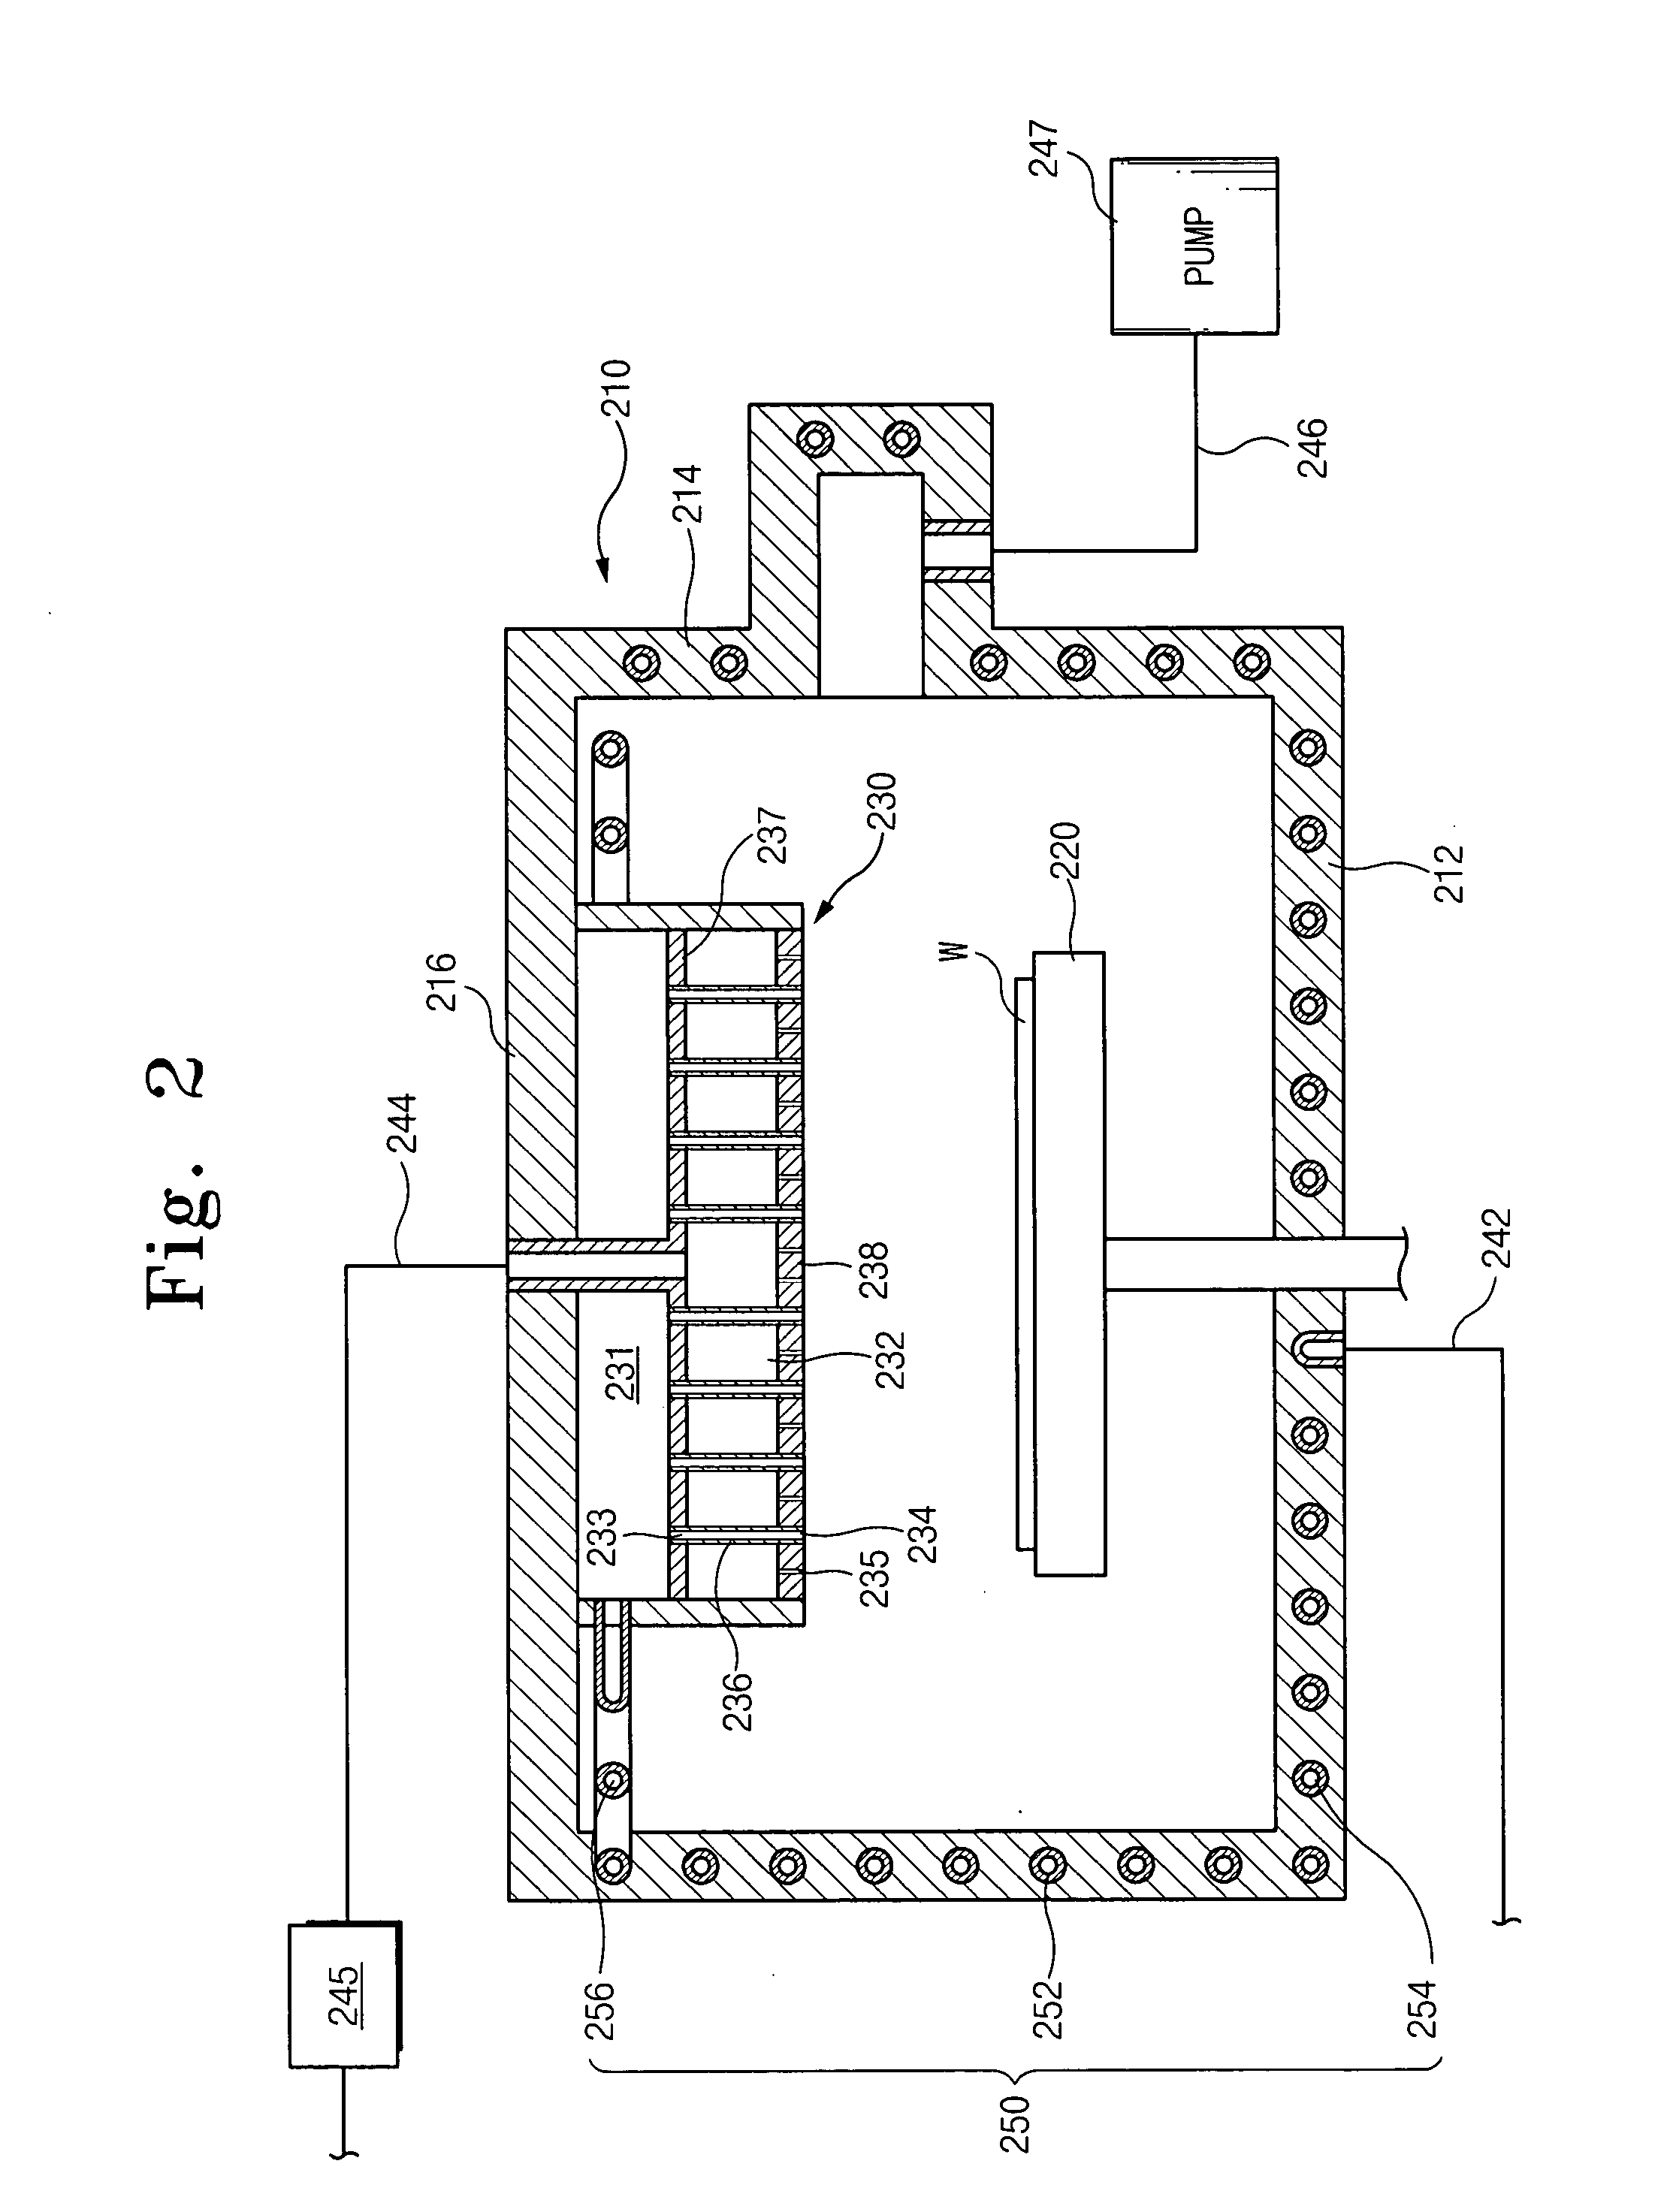 Apparatus for fabricating semiconductor devices, heating arrangement, shower head arrangement, method of reducing thermal disturbance during fabrication of a semiconductor device, and method of exchanging heat during fabrication of a semiconductor device